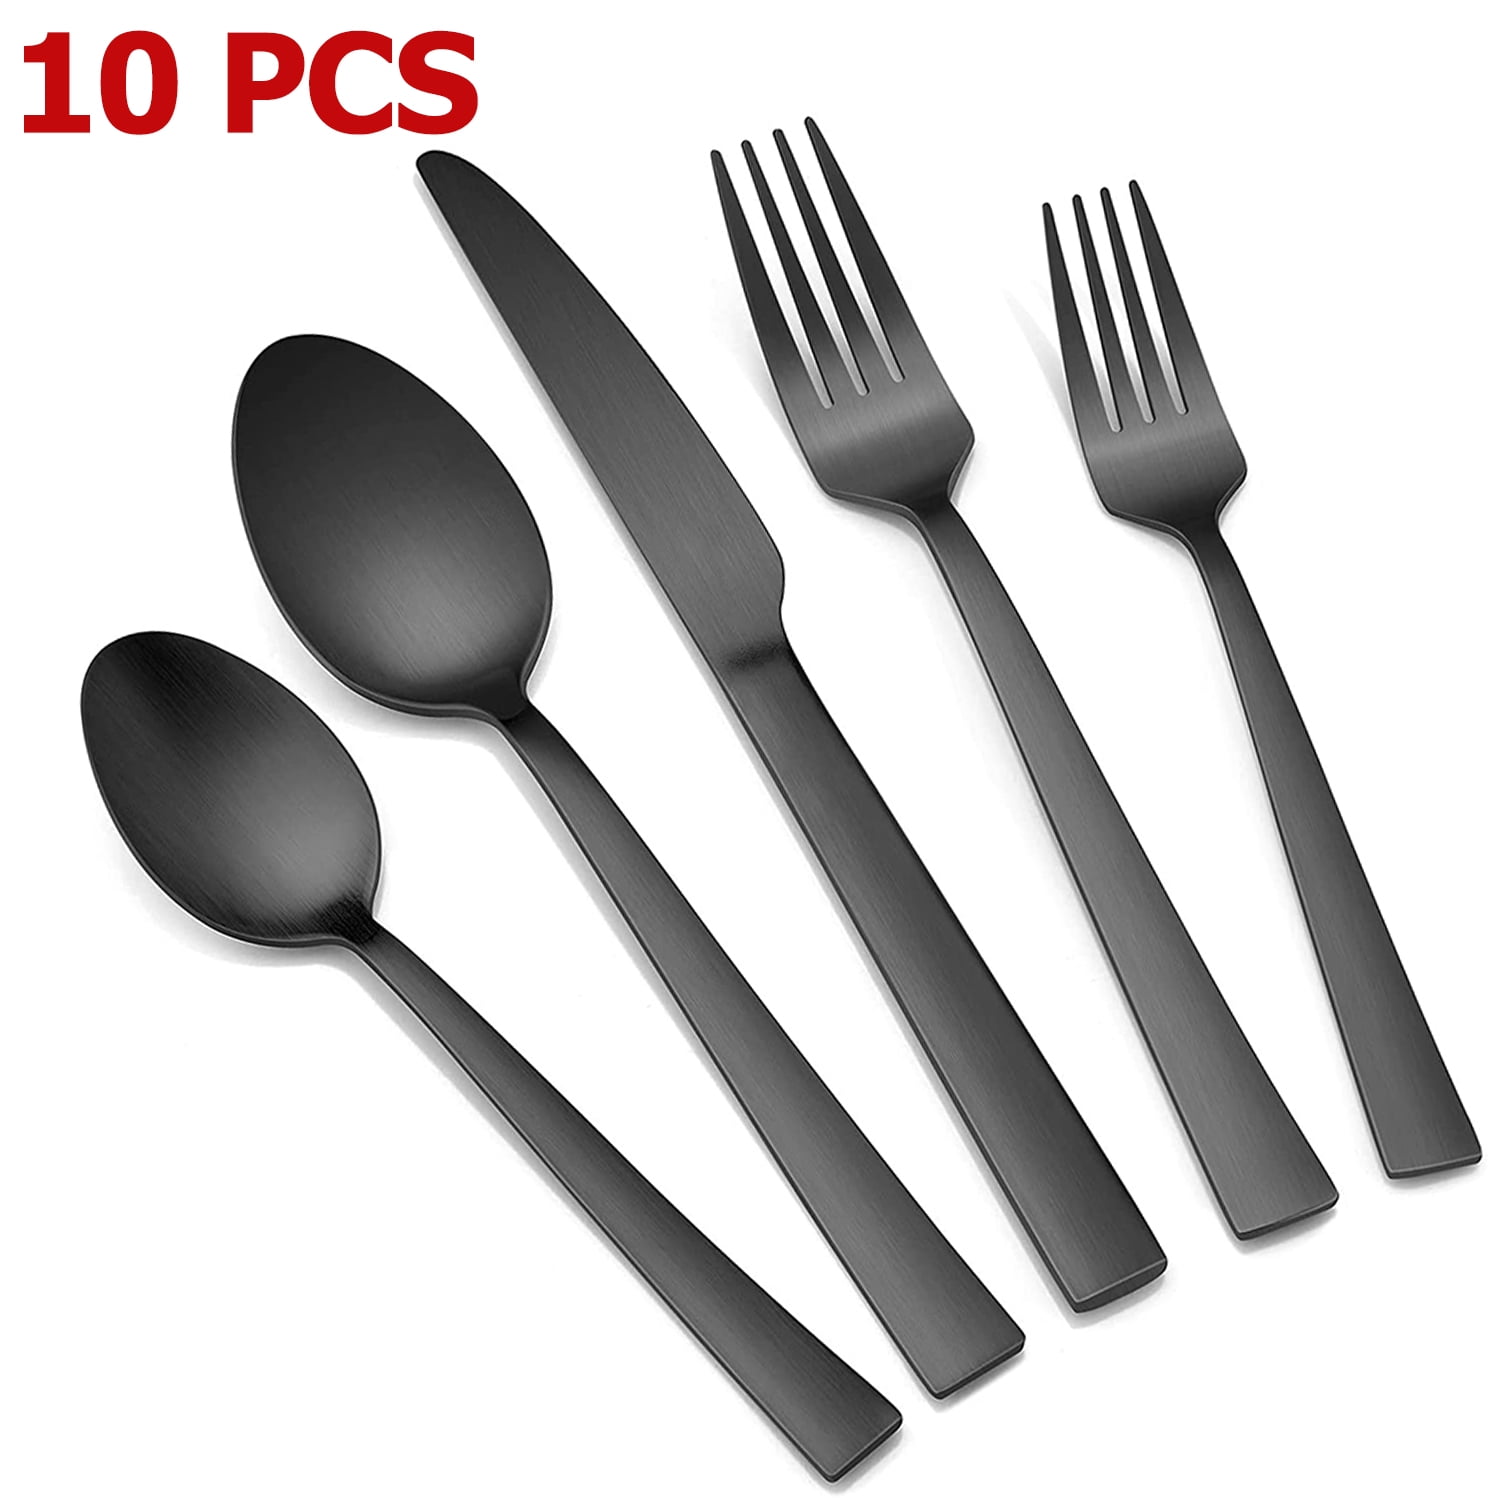 Matte Black Silverware Set Serve for 8, 40 Pieces Heavy Stainless